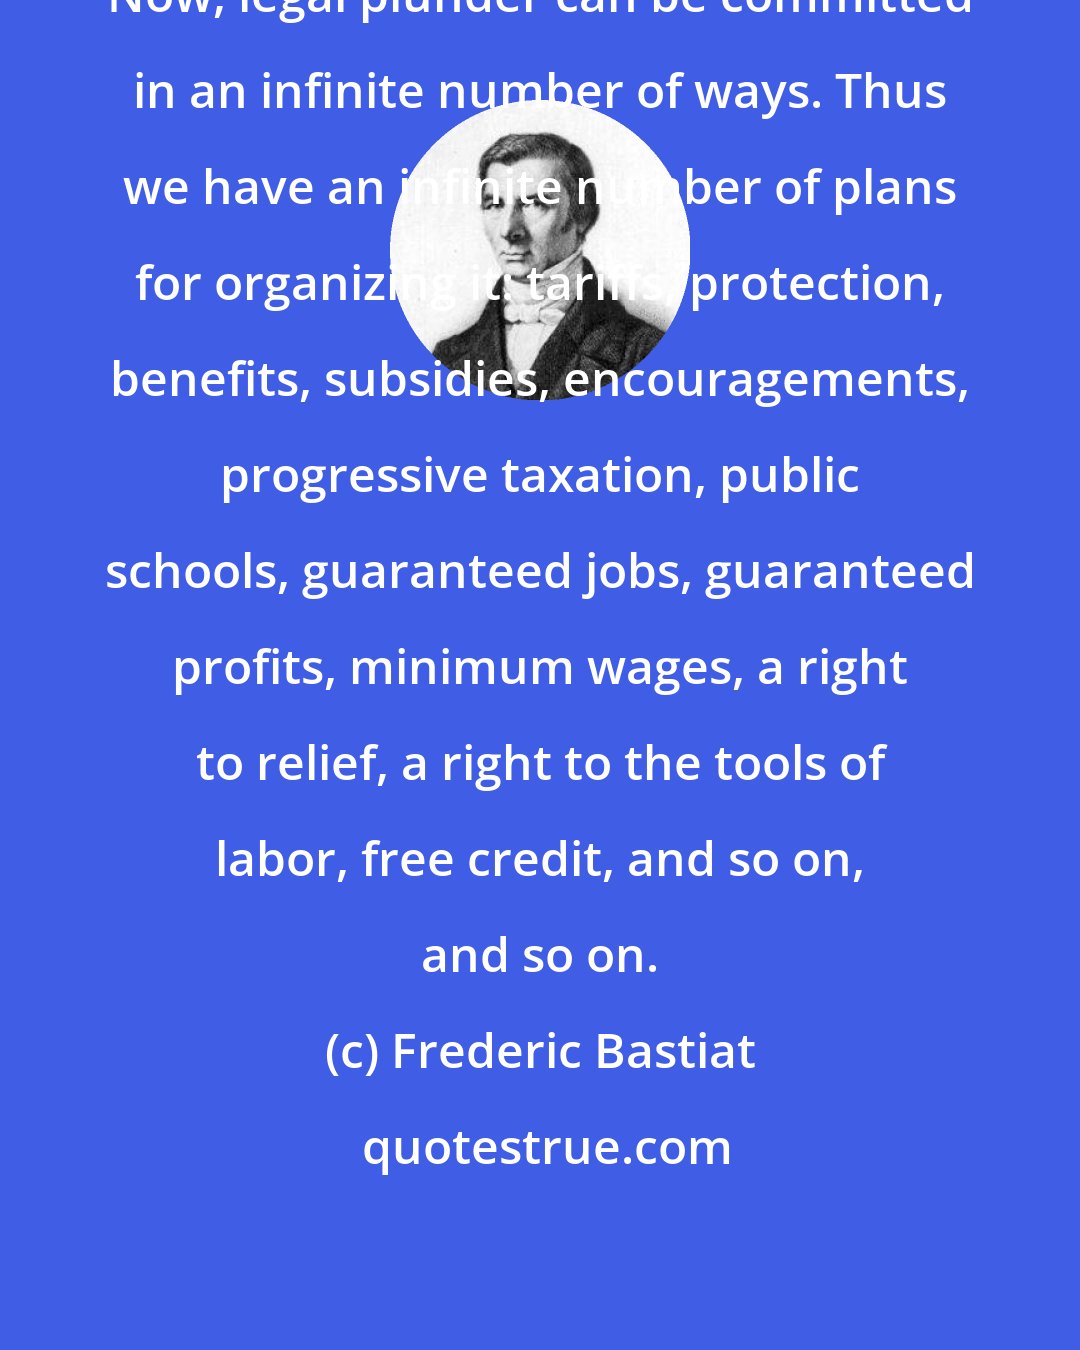 Frederic Bastiat: Now, legal plunder can be committed in an infinite number of ways. Thus we have an infinite number of plans for organizing it: tariffs, protection, benefits, subsidies, encouragements, progressive taxation, public schools, guaranteed jobs, guaranteed profits, minimum wages, a right to relief, a right to the tools of labor, free credit, and so on, and so on.